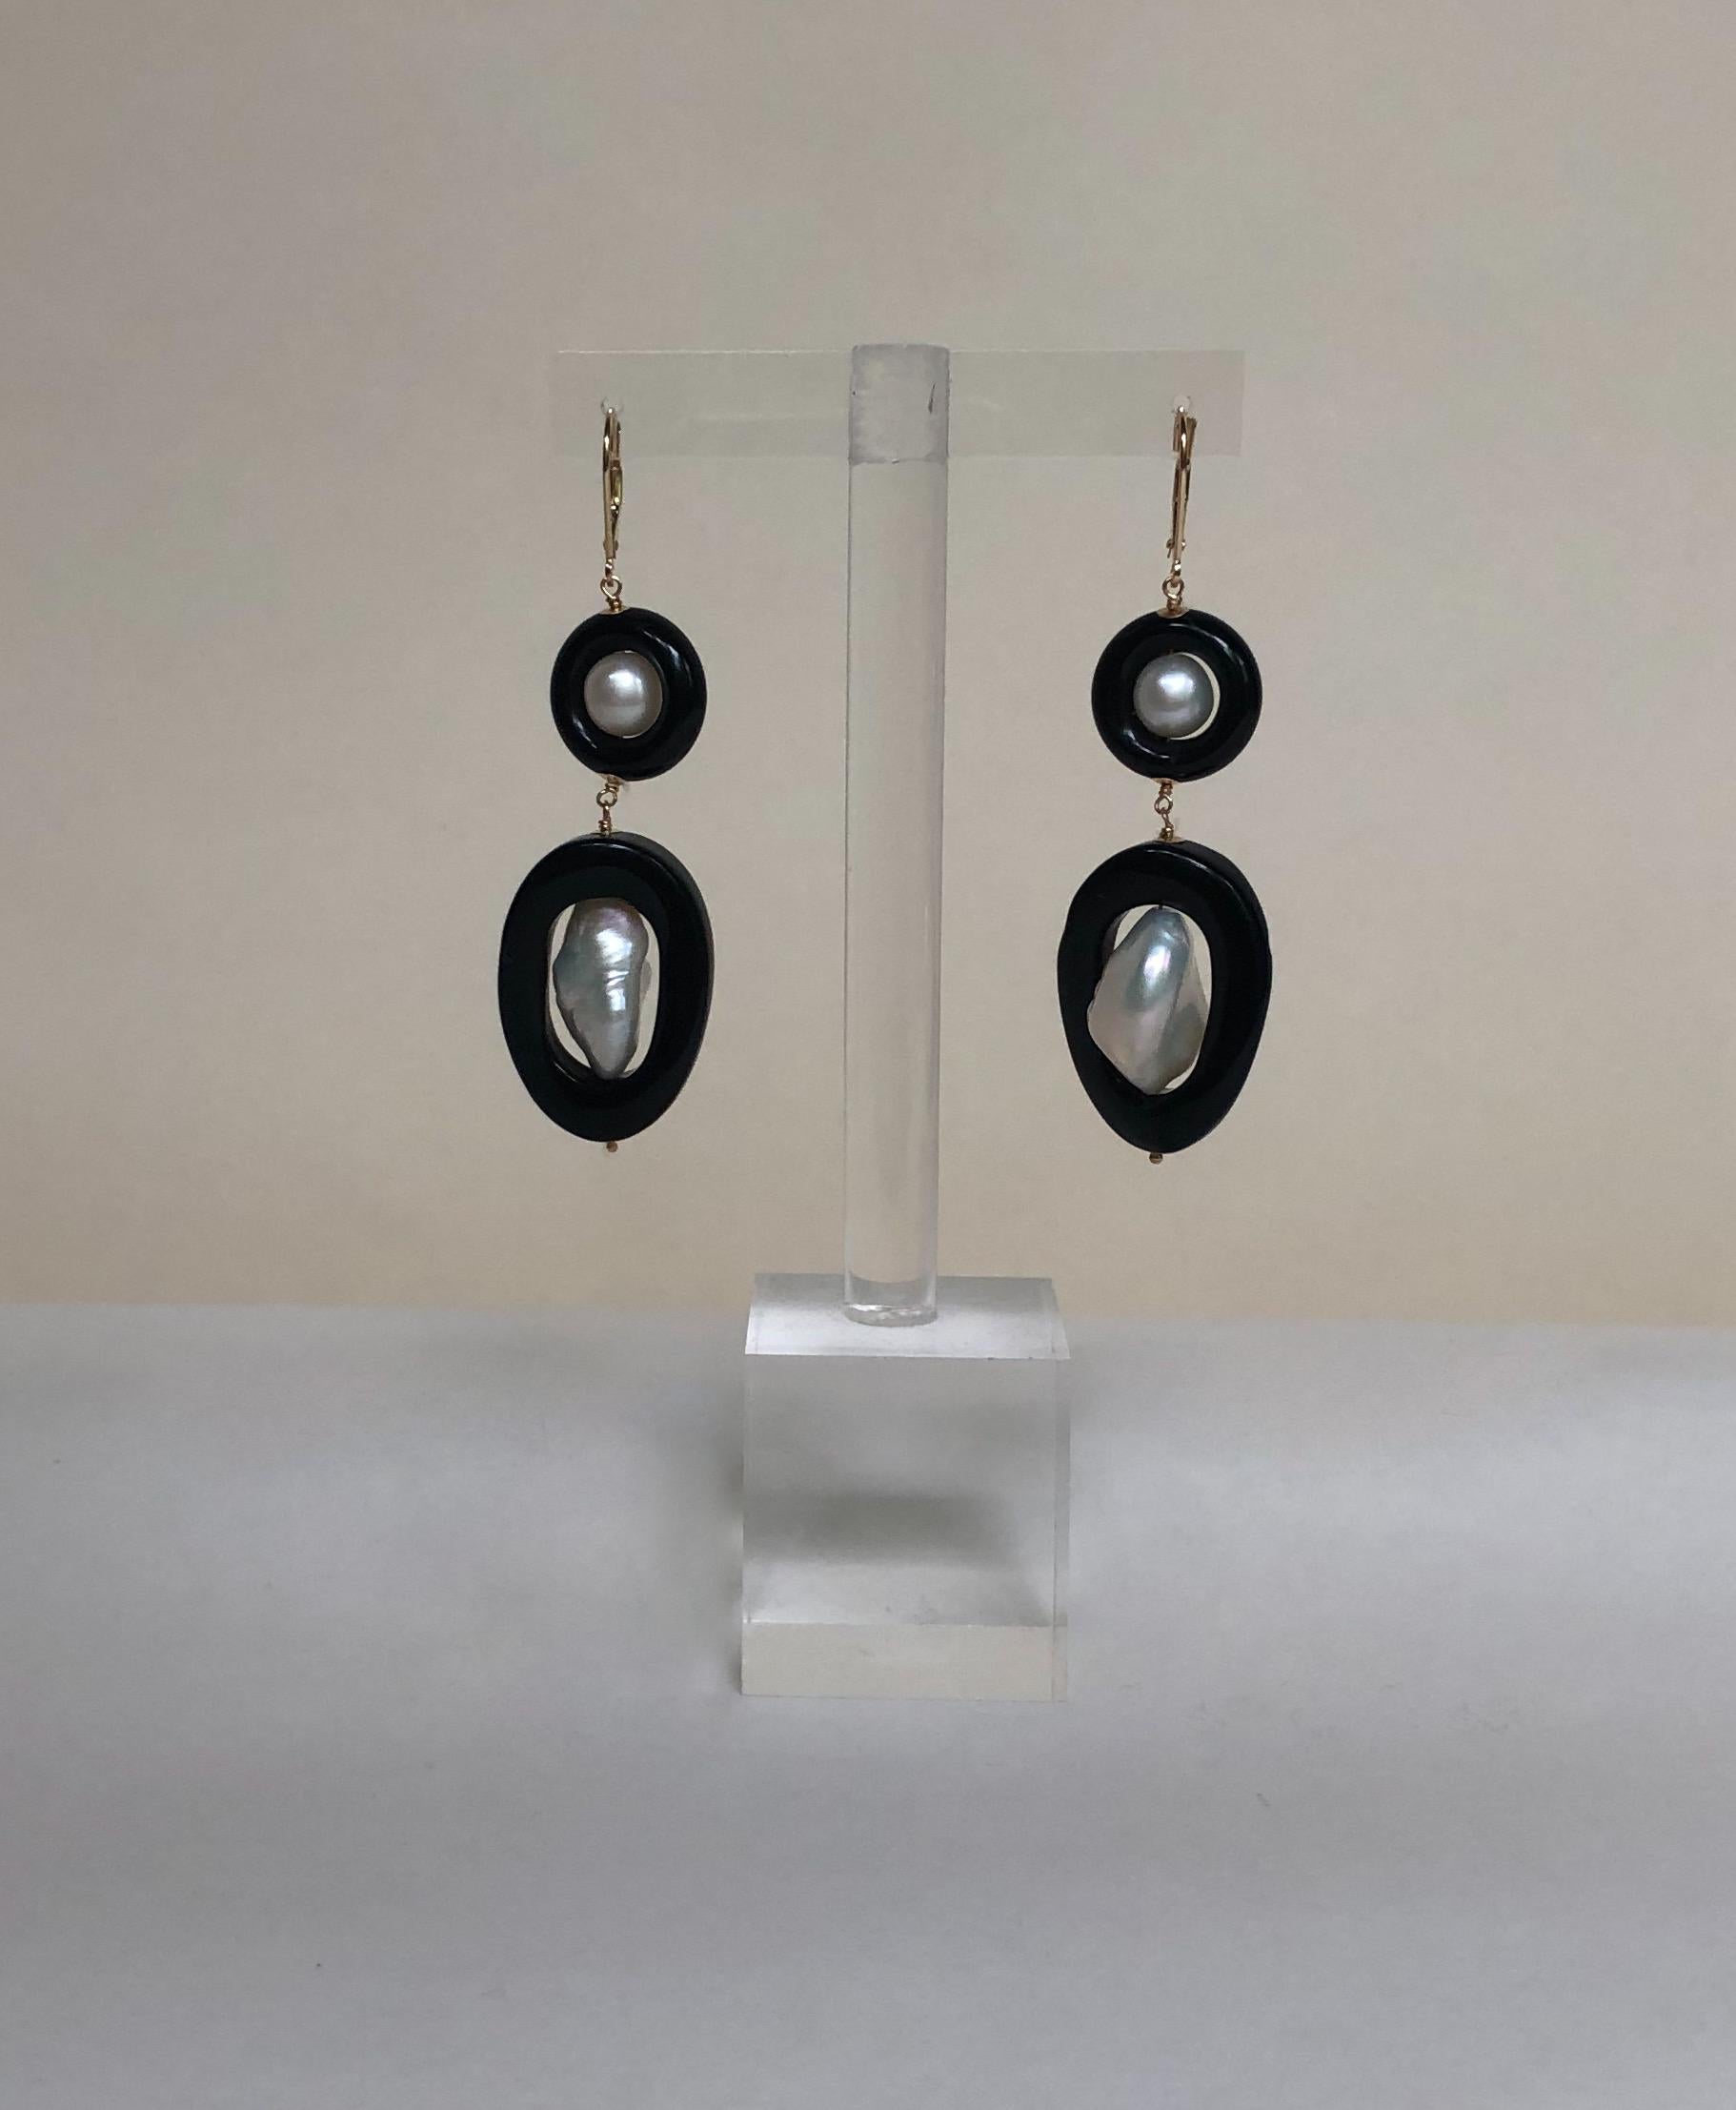 These beautiful, unique earrings are made from black onyx and pearls. The wiring and leverback are made from 14k yellow gold. The onyx ring contrasts with the glowing white pearl beautifully, which is sure to make a statement in any look. The